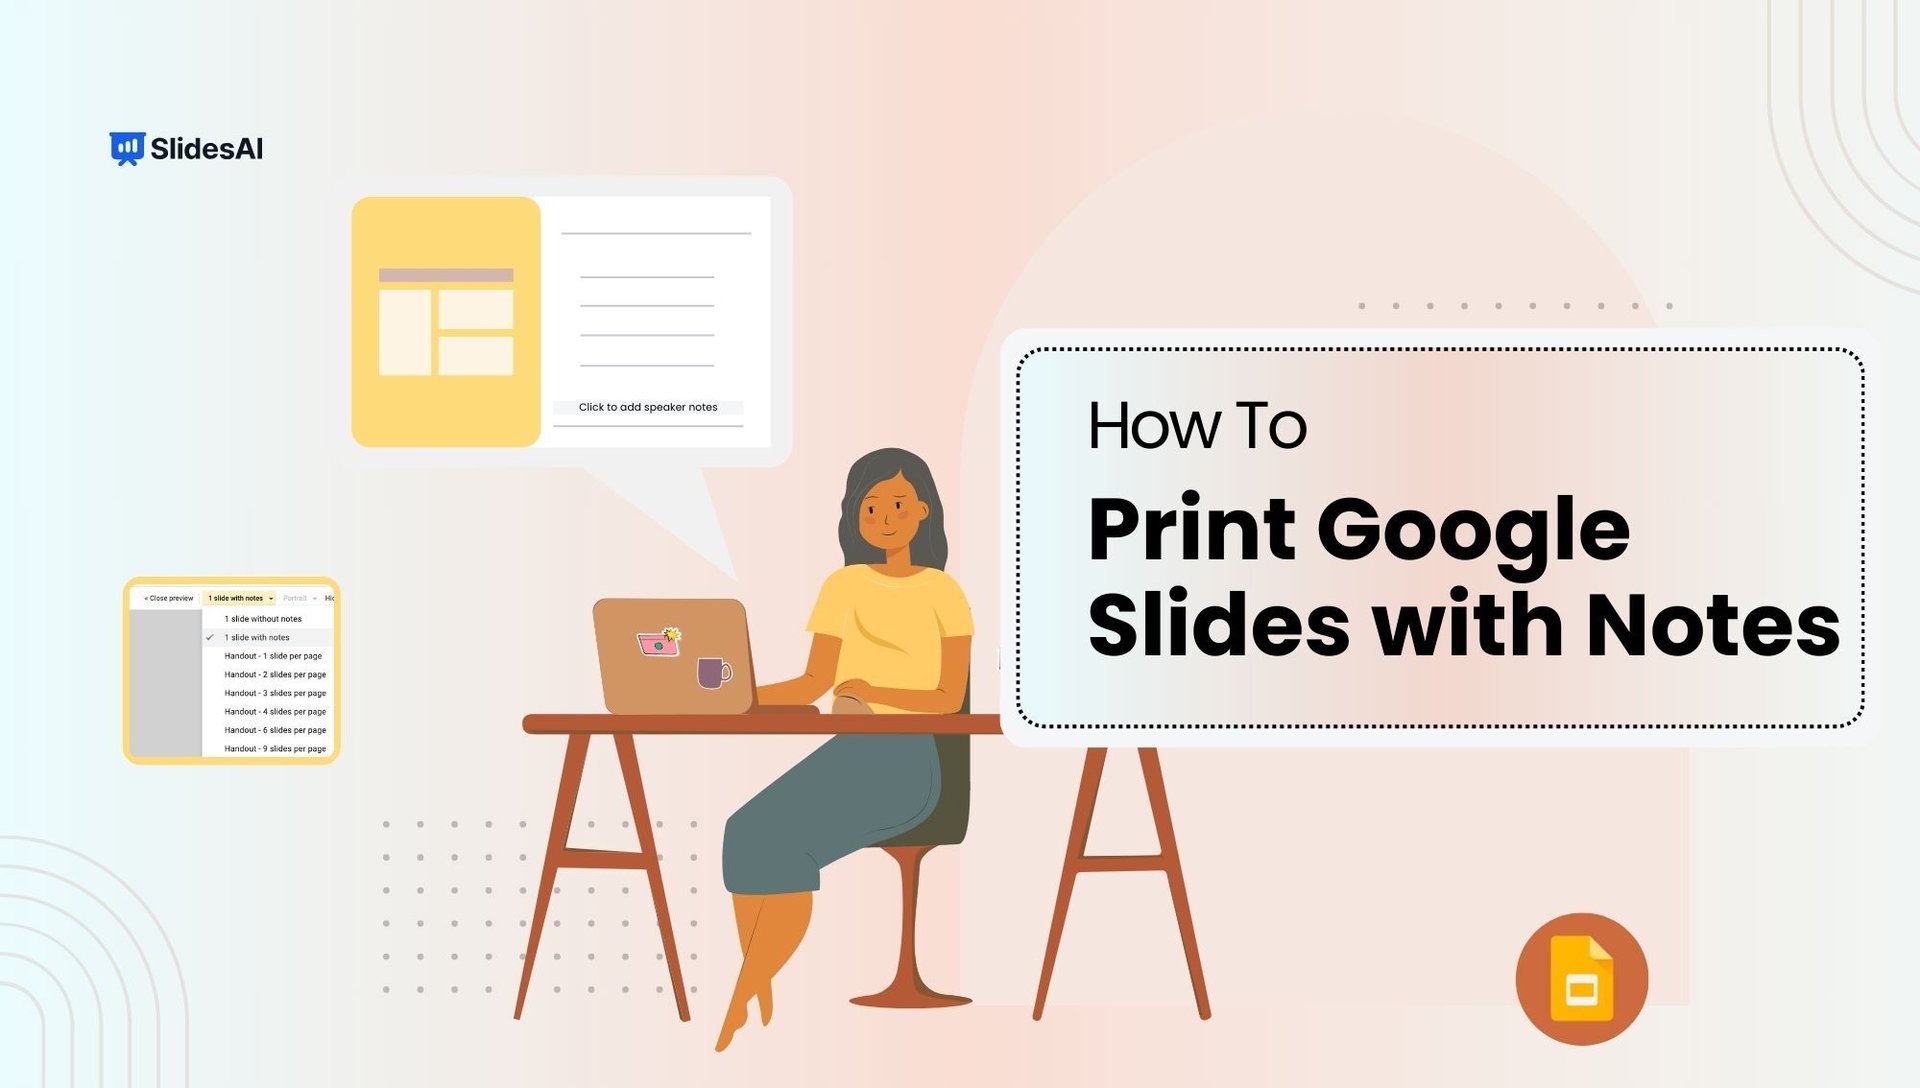 How to Print Google Slides with Notes?